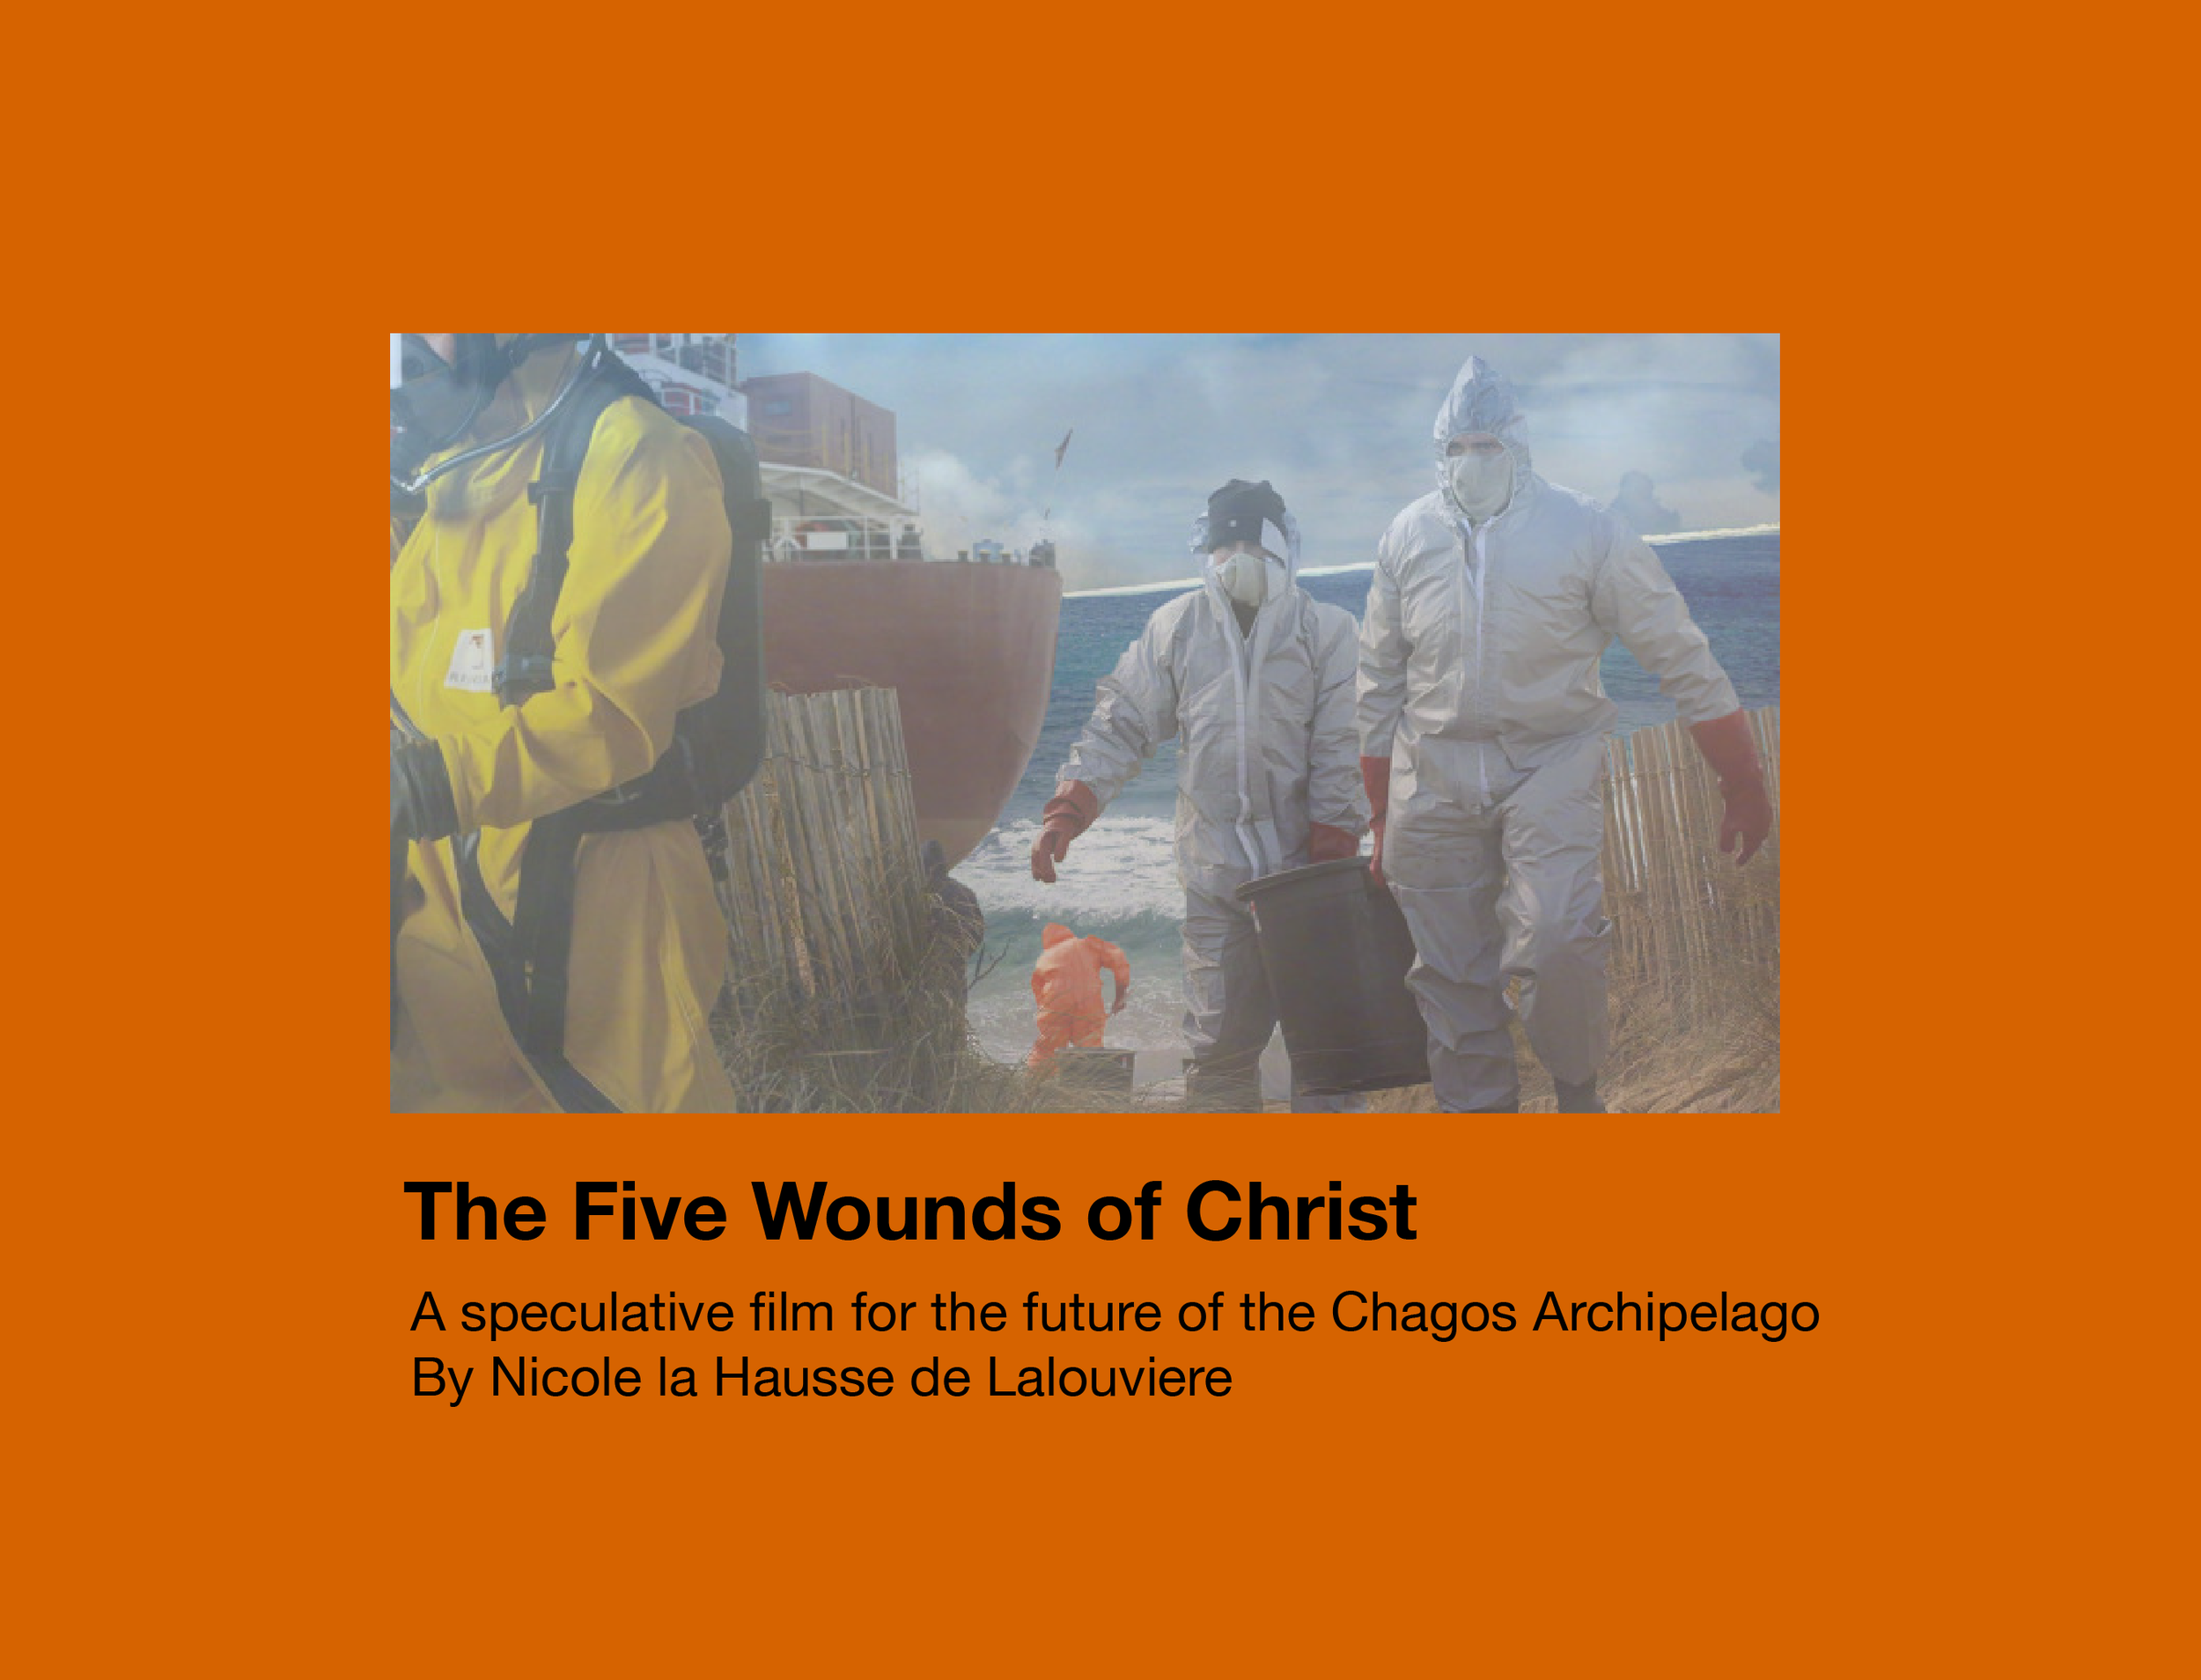 The Five Wounds of Christ